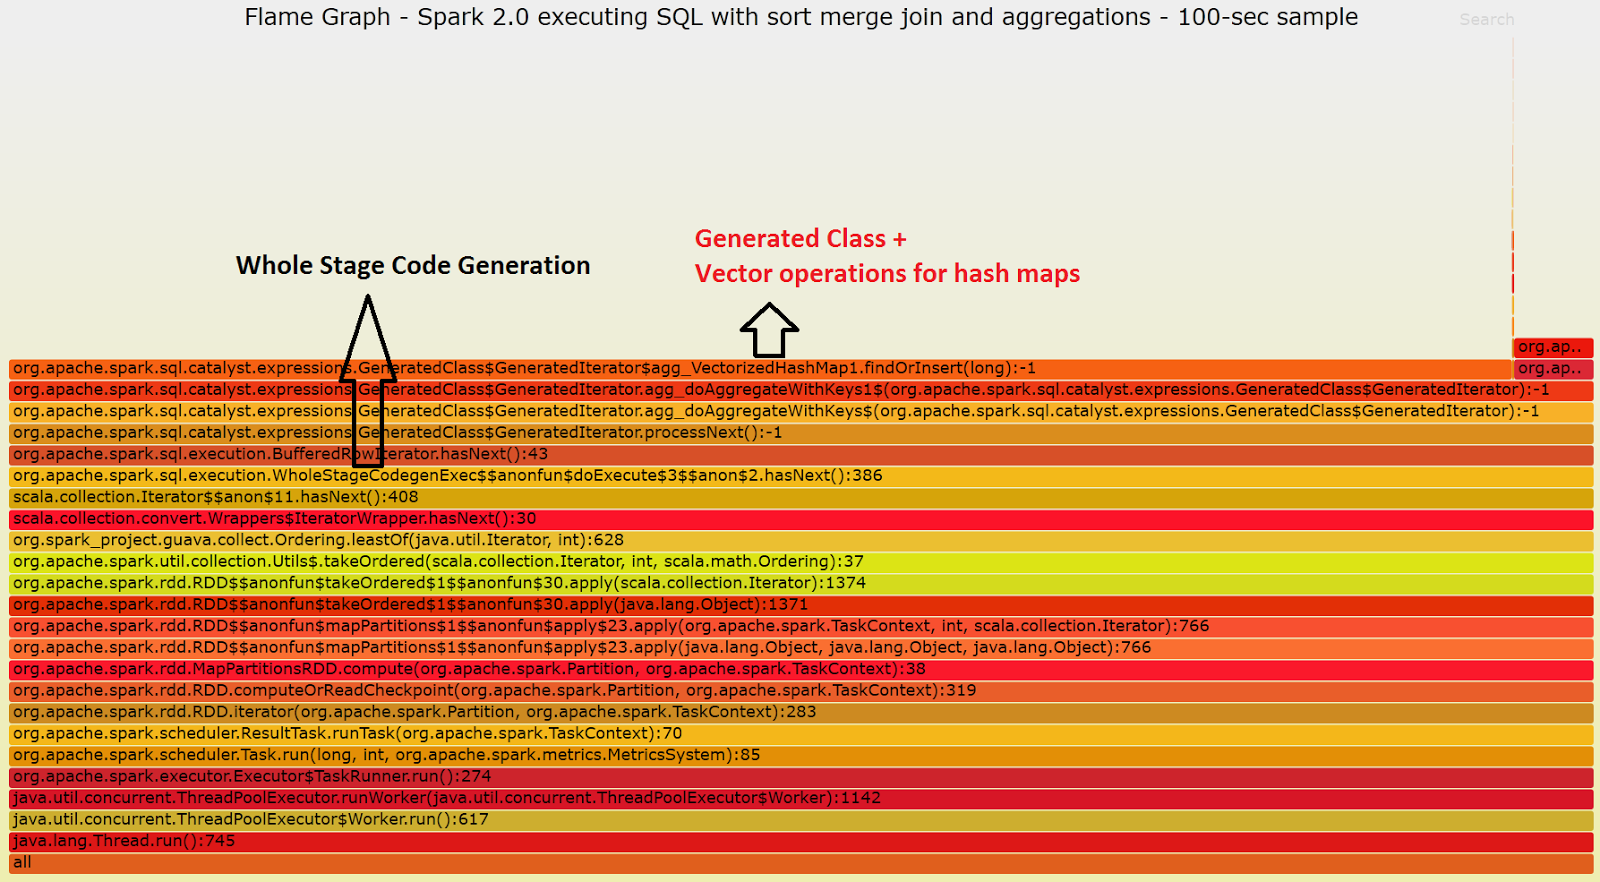 flamegraph_spark20_blog_wholestagecodegeneration_annotated